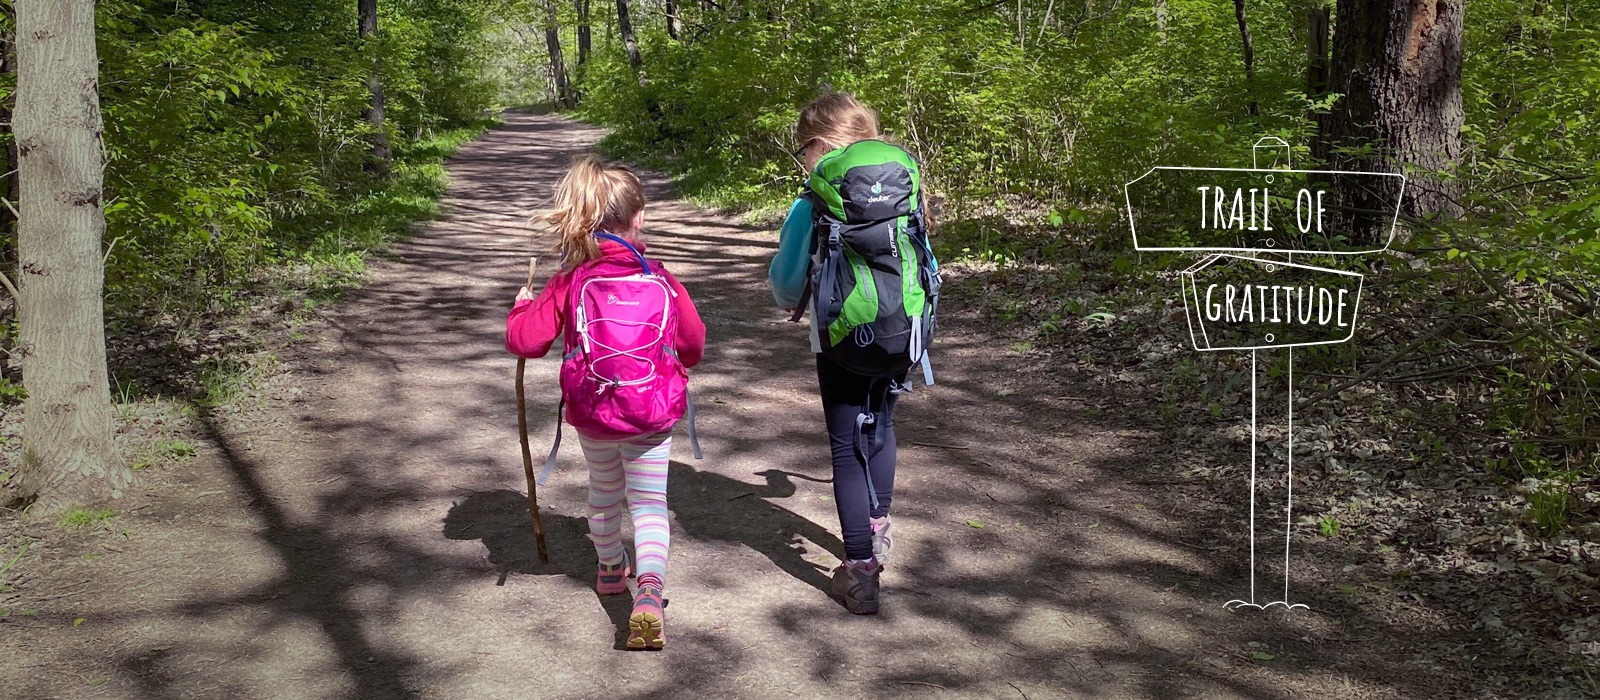 Two little girls with their backpacks and hiking sticks walking on a trail.